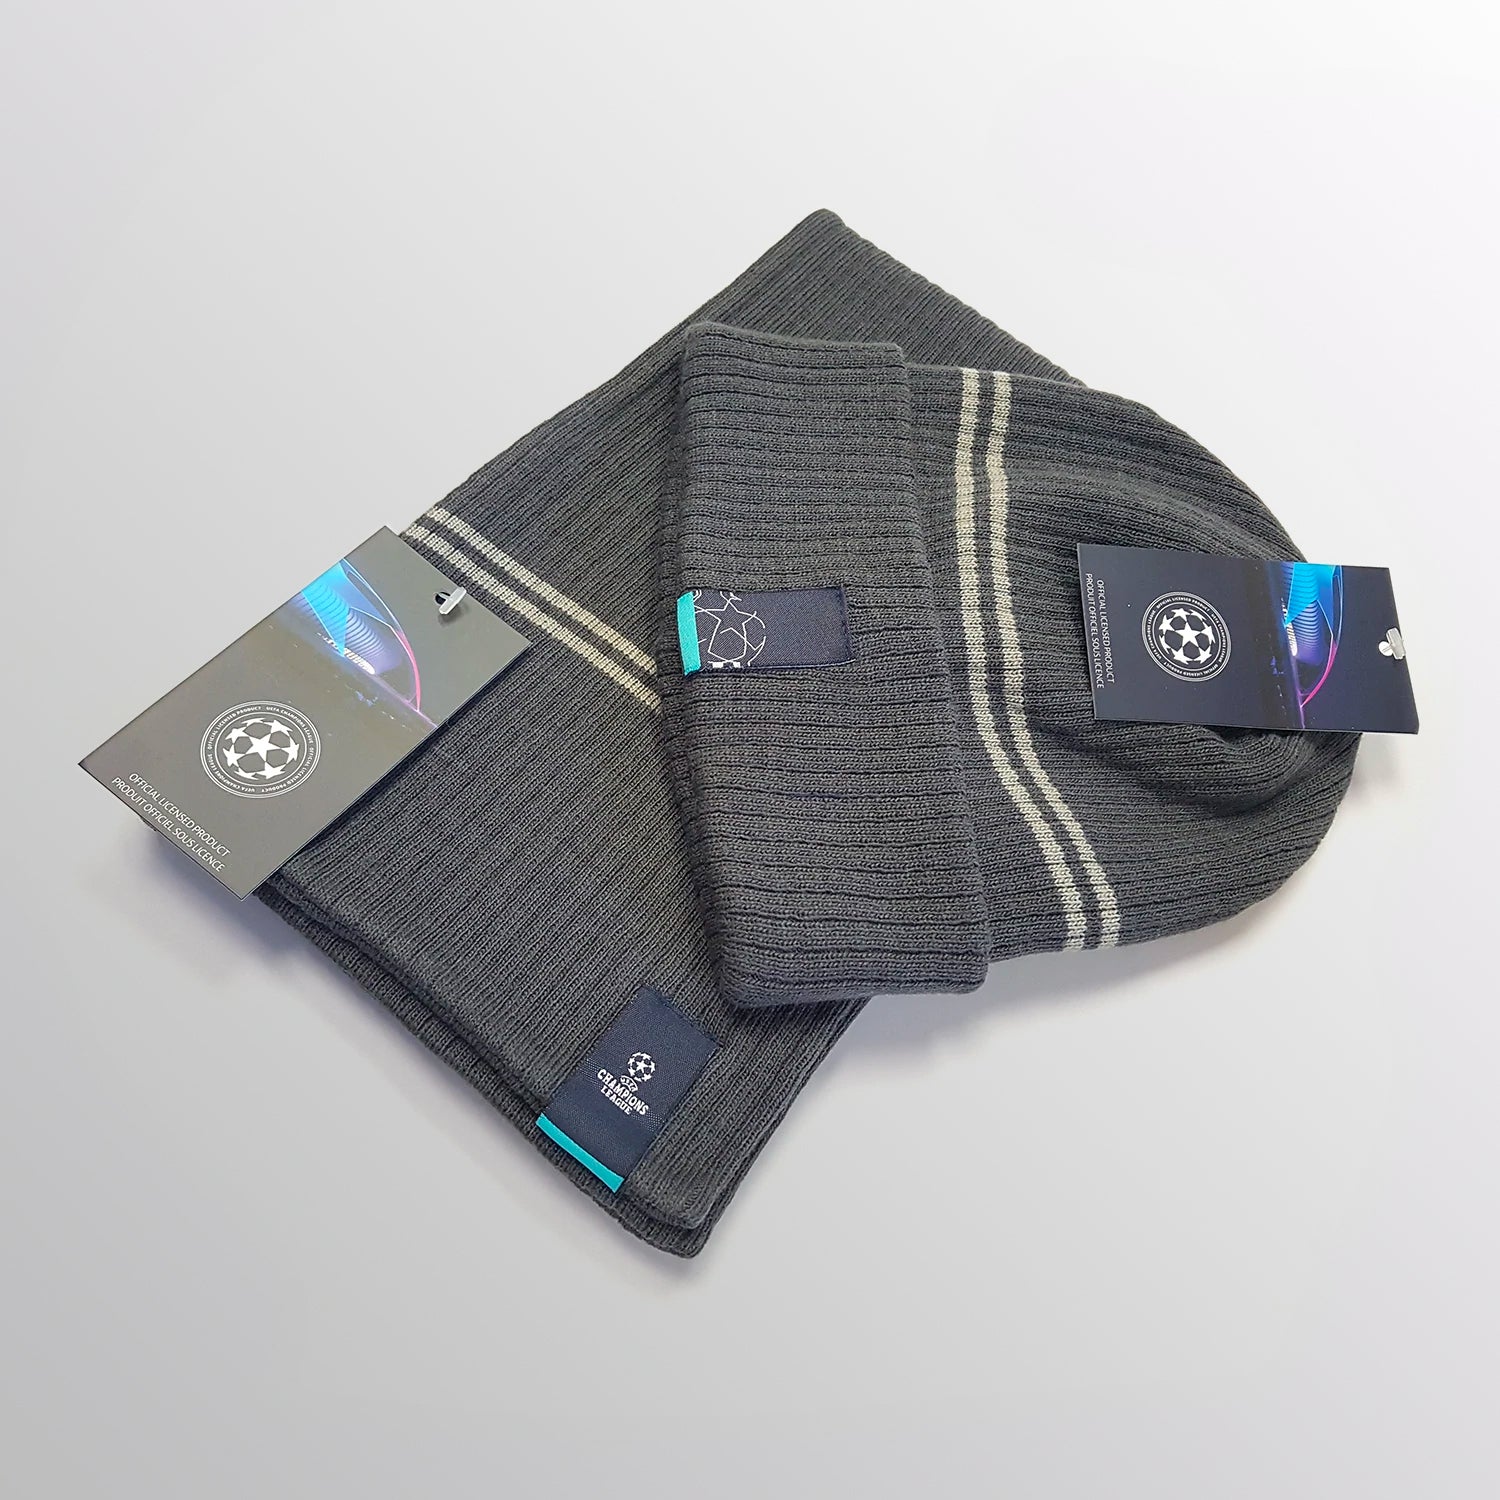 UEFA Champions League - Beanie & Scarf Set UEFA Club Competitions Online Store